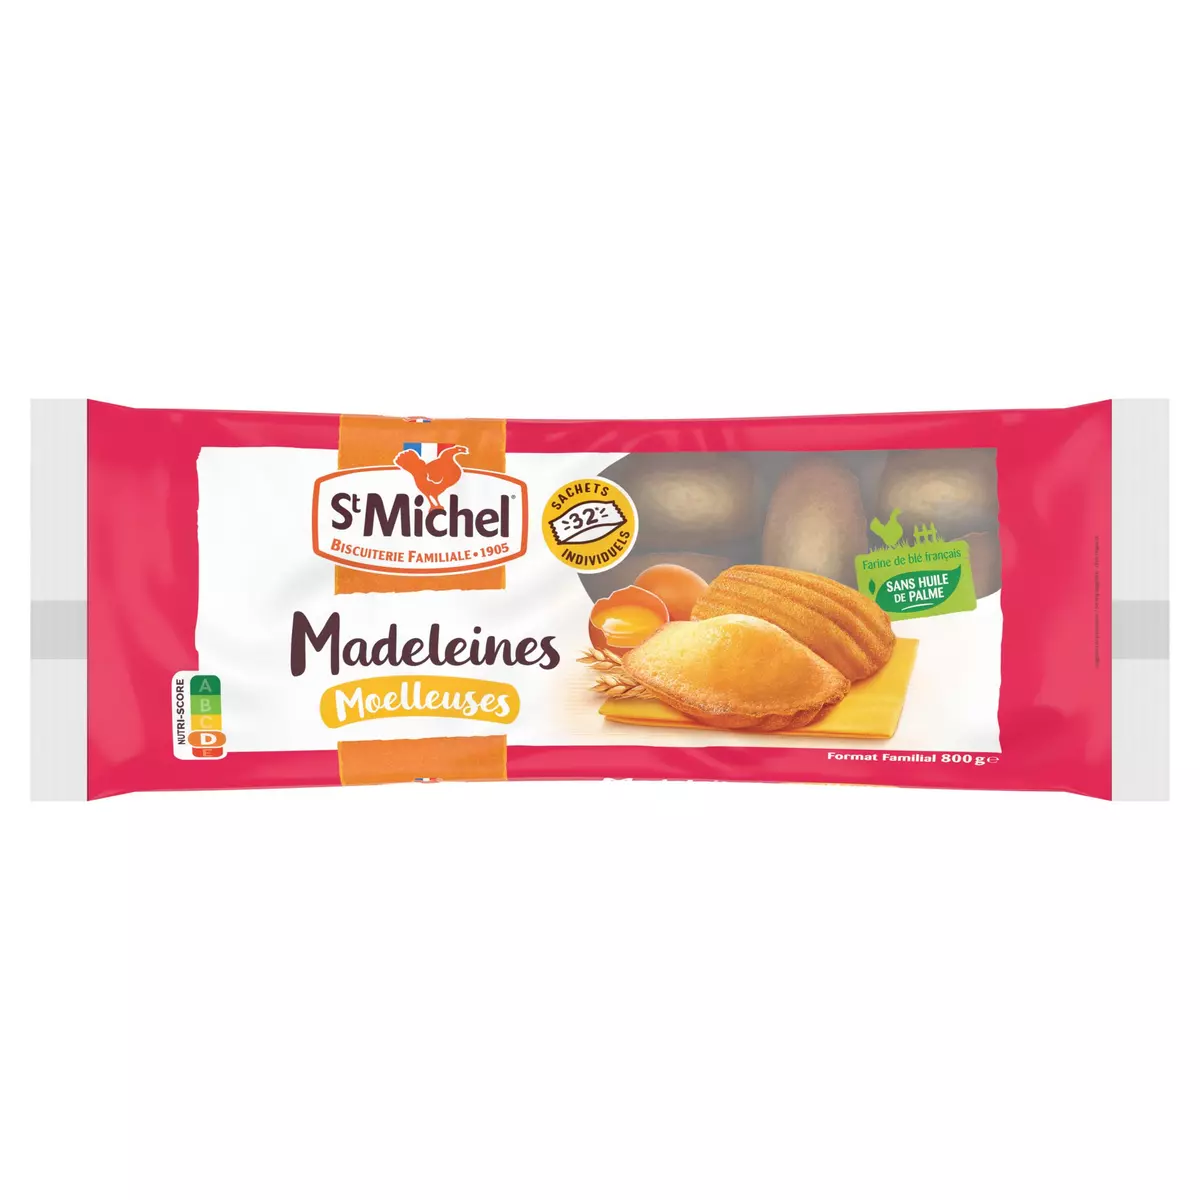 ST MICHEL Madeleines moelleuses nature sachets individuels 32 madeleines 800g